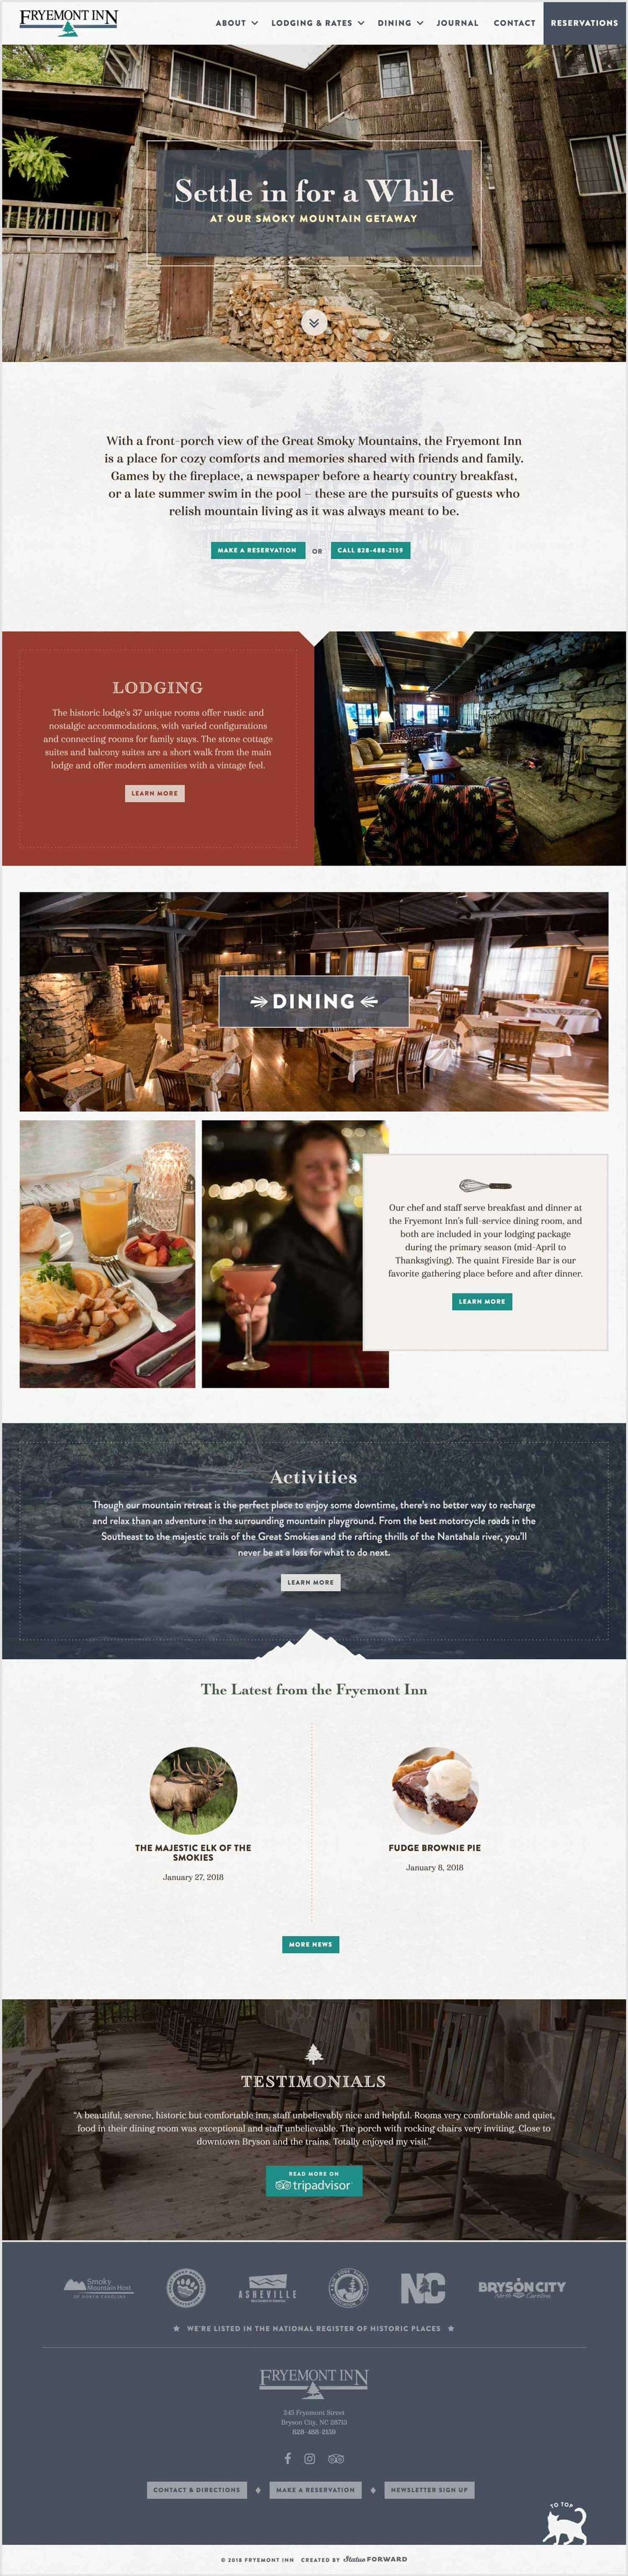 Fryemont Inn Home Page